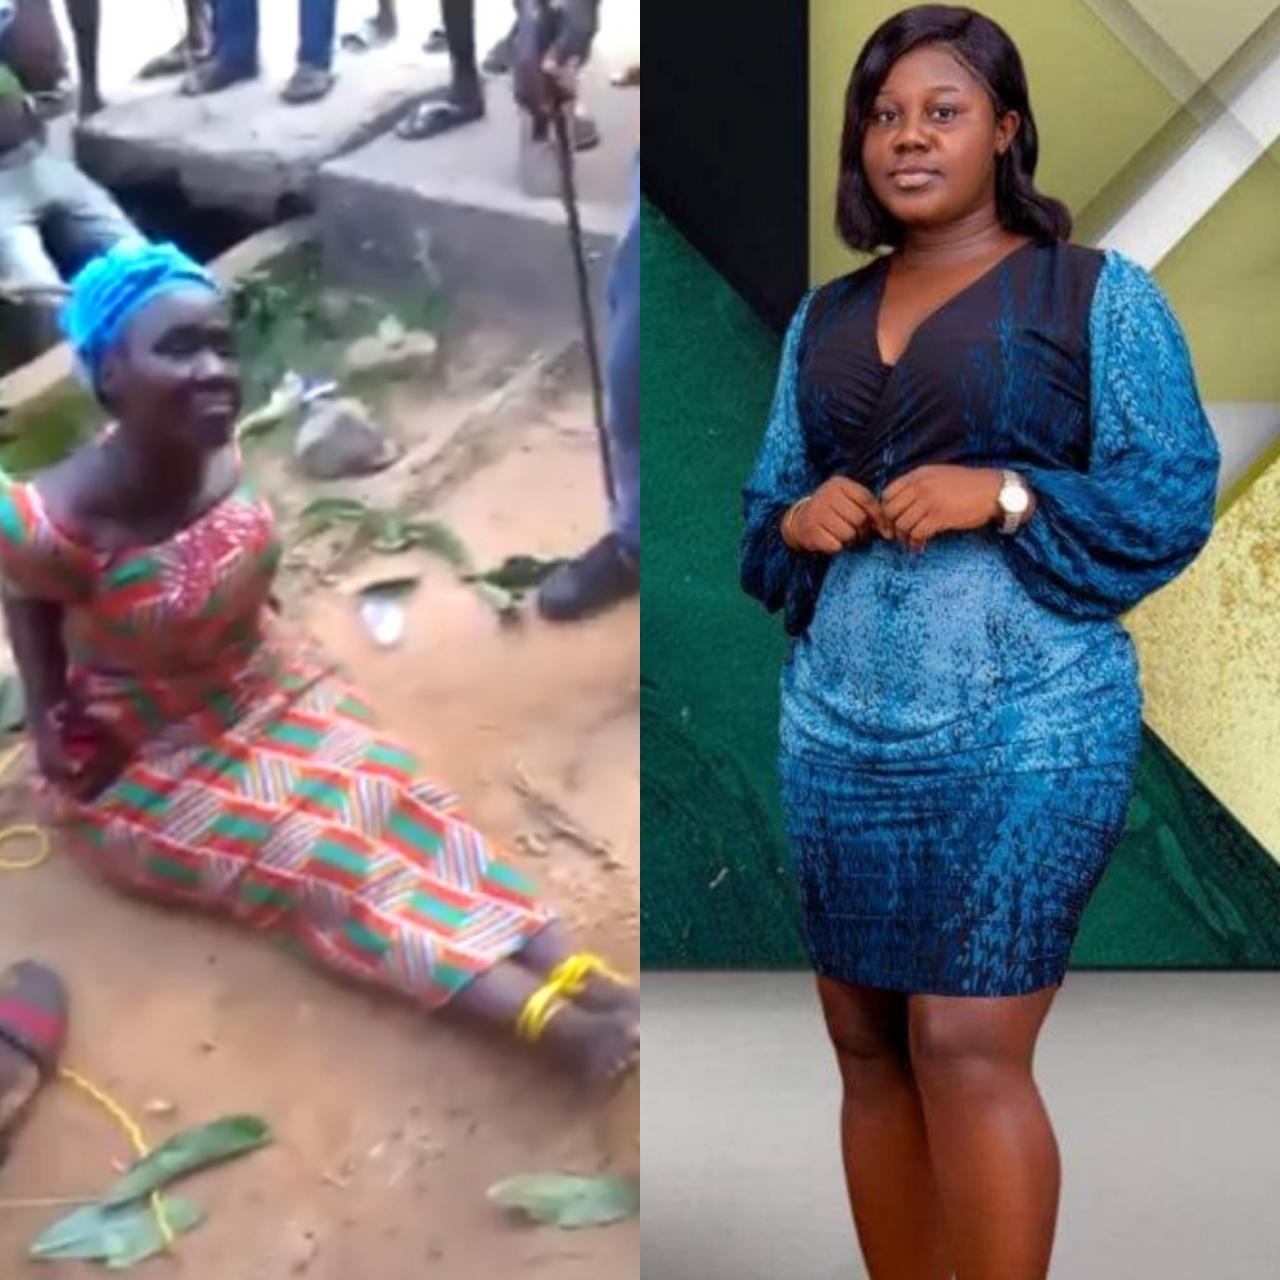 I want revenge" Lady whose widowed mother was tied up for days and flogged in Abia community speaks